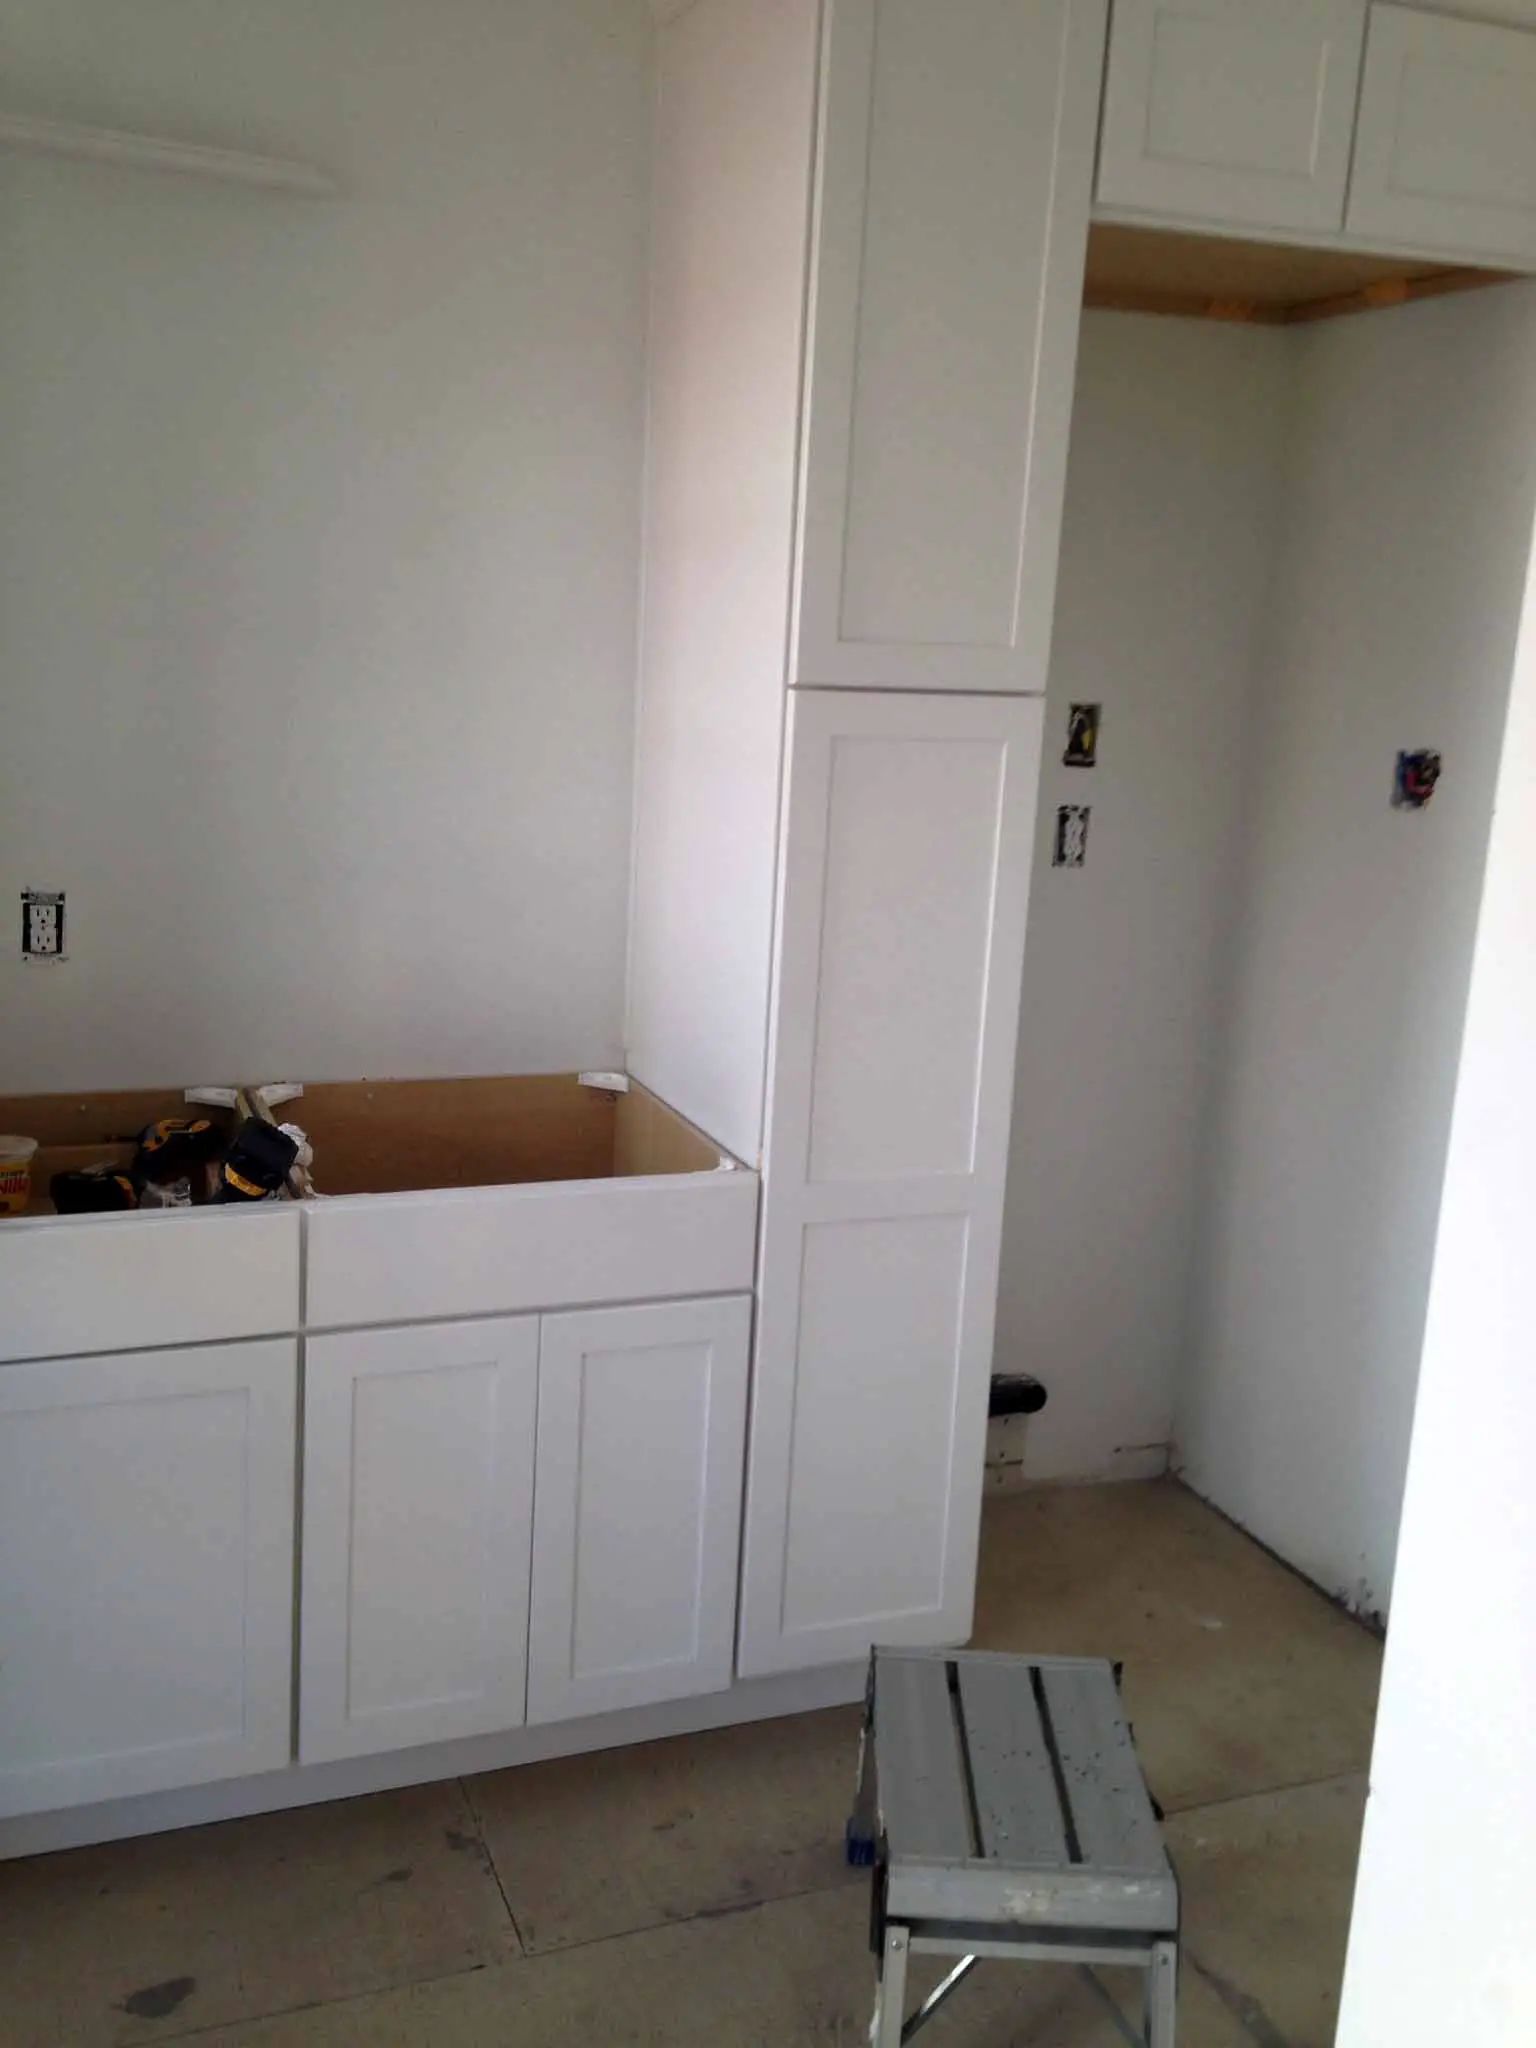 Mudroom/Laundry Room Cabinetry Being Installed - That Homebird Life